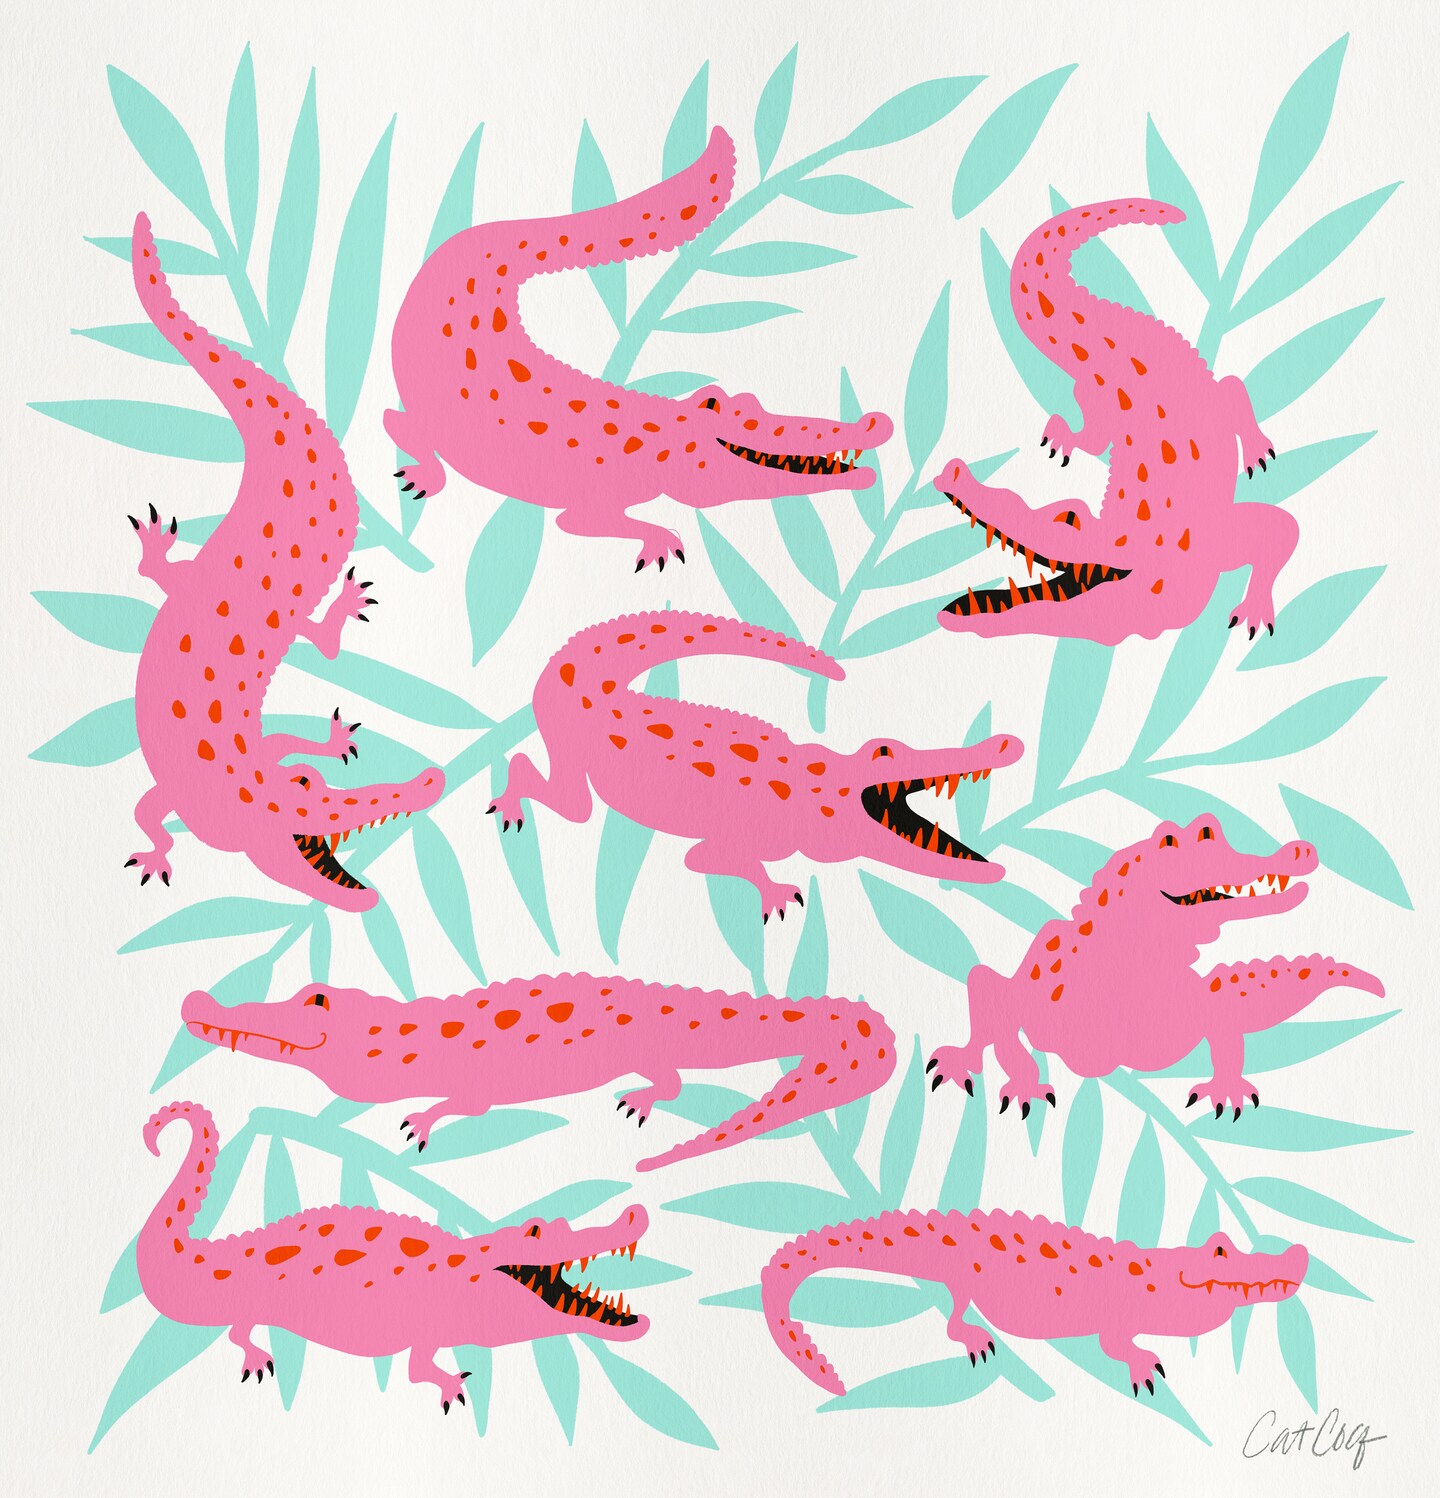 Pink Turquoise Alligator Collection by Cat Coquillette Shower